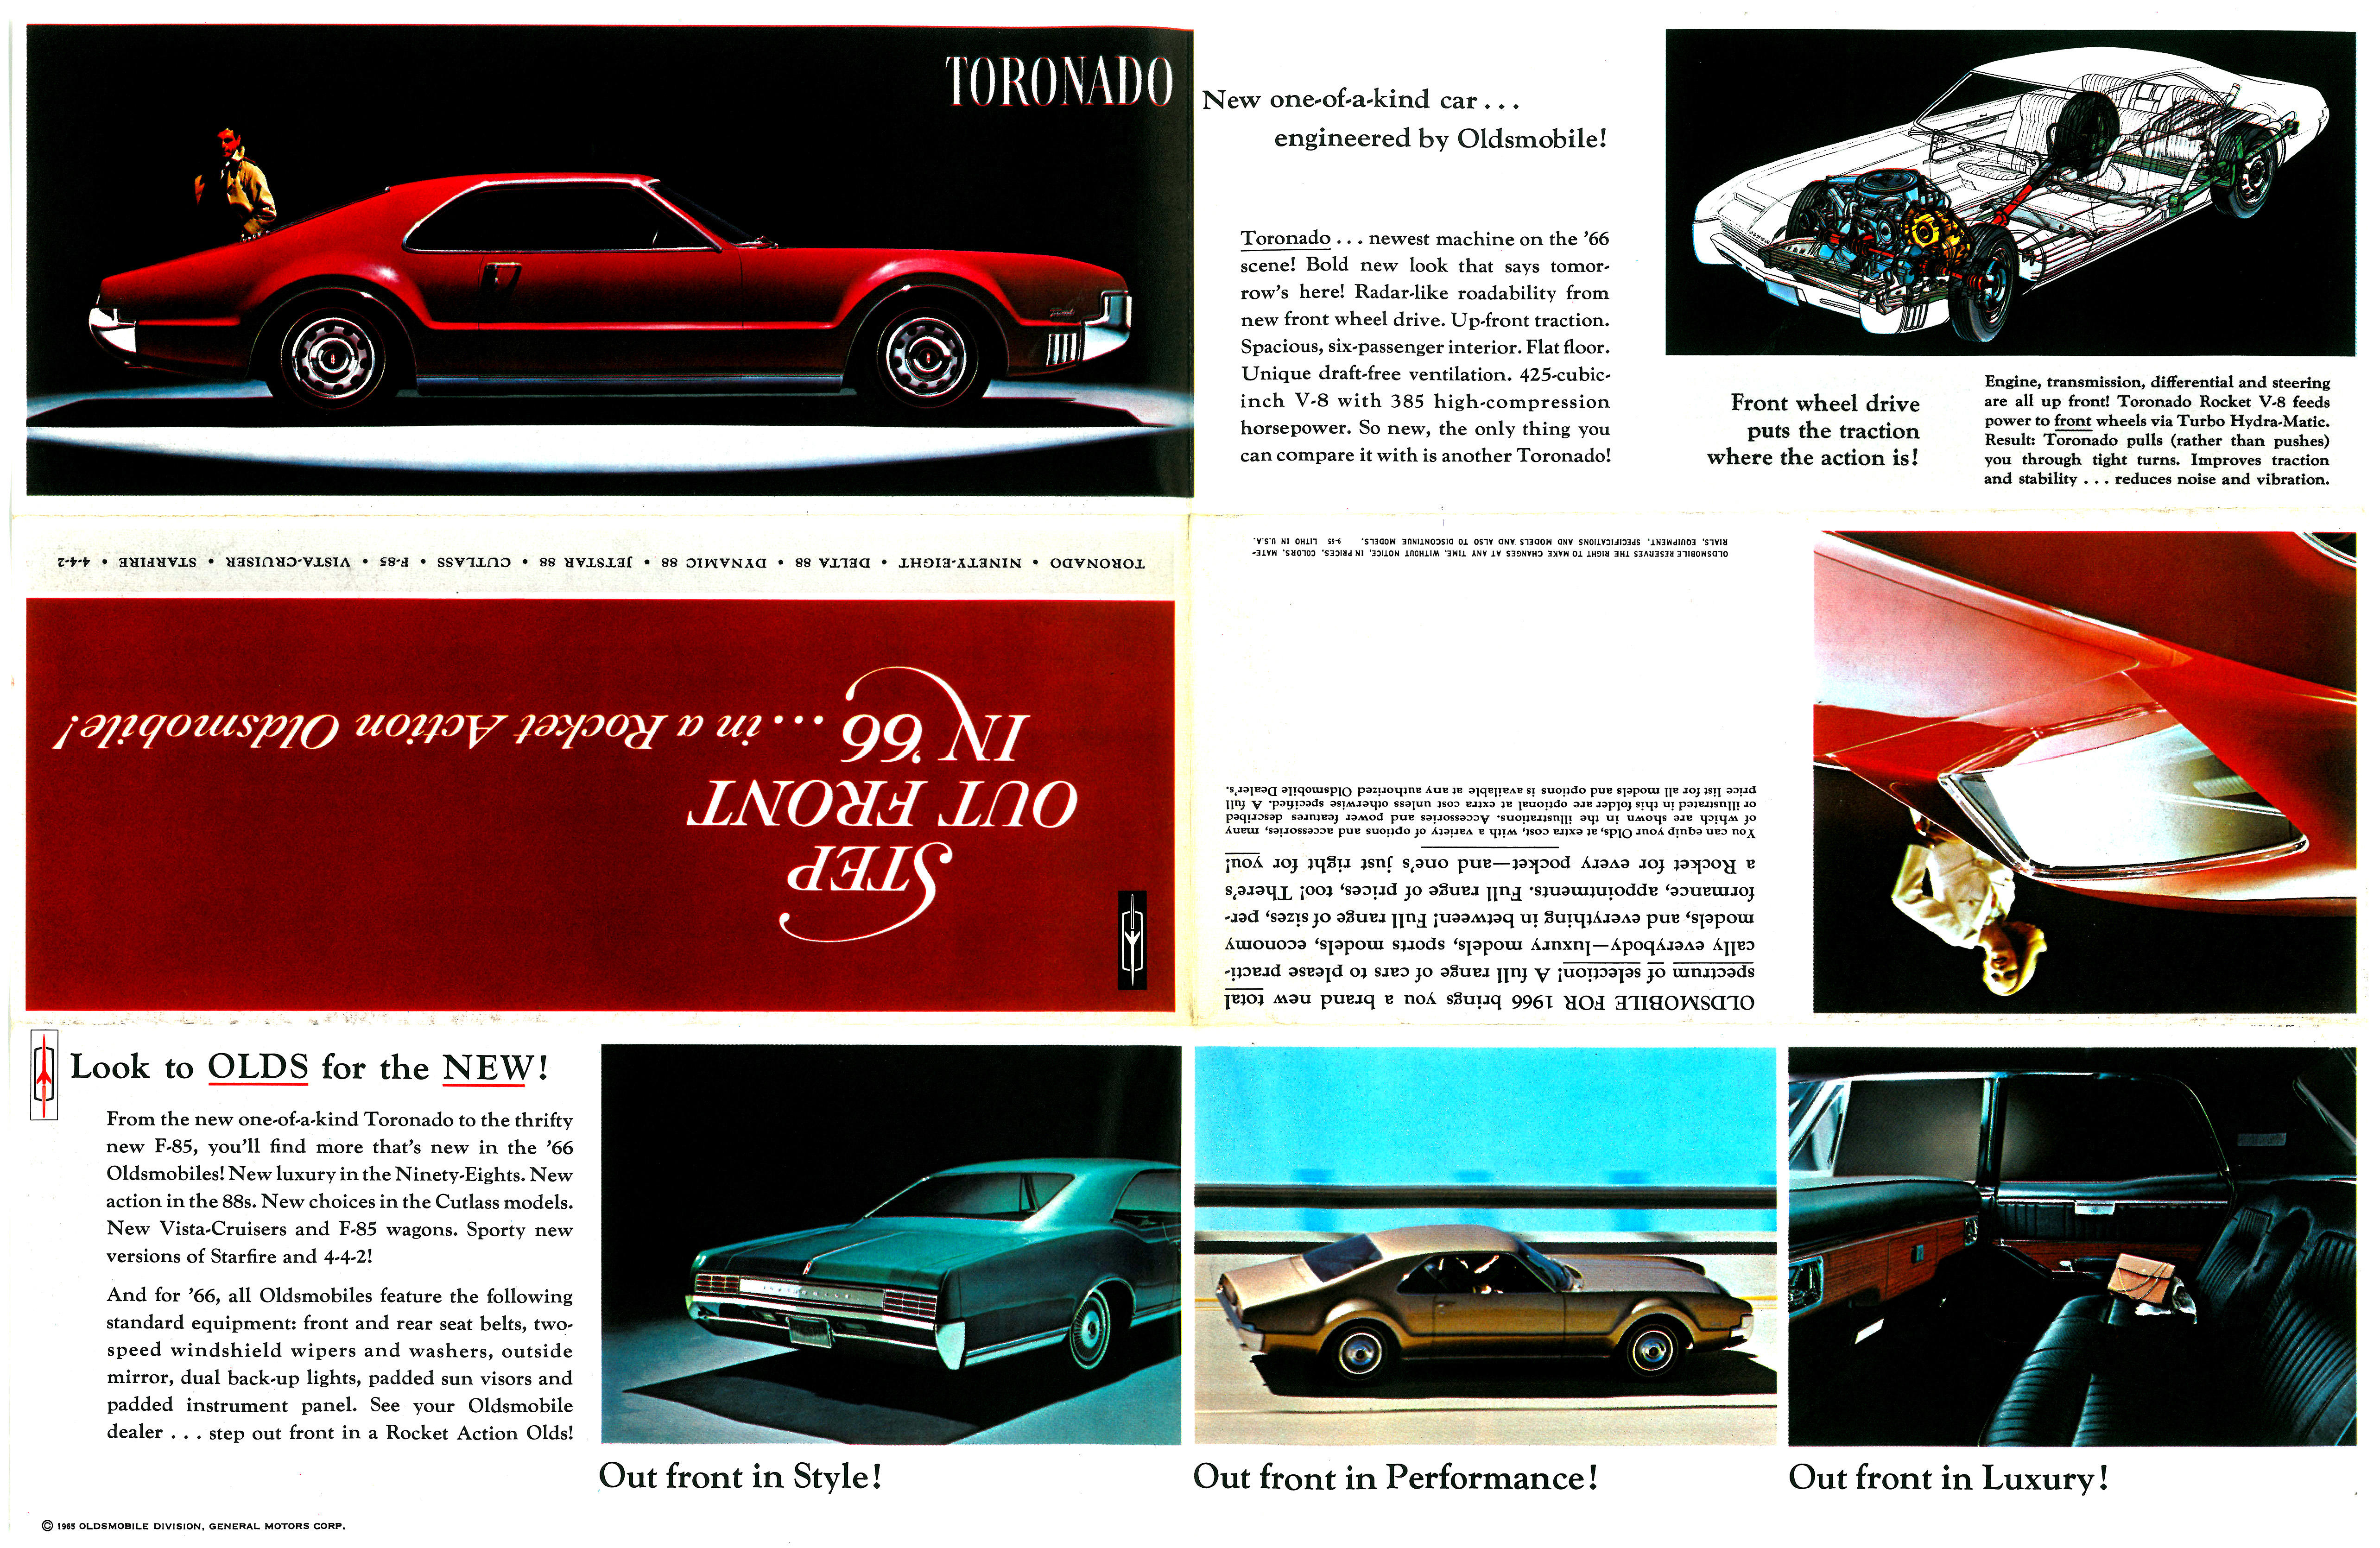 oldsmobile_broszura_step_out_Page_2